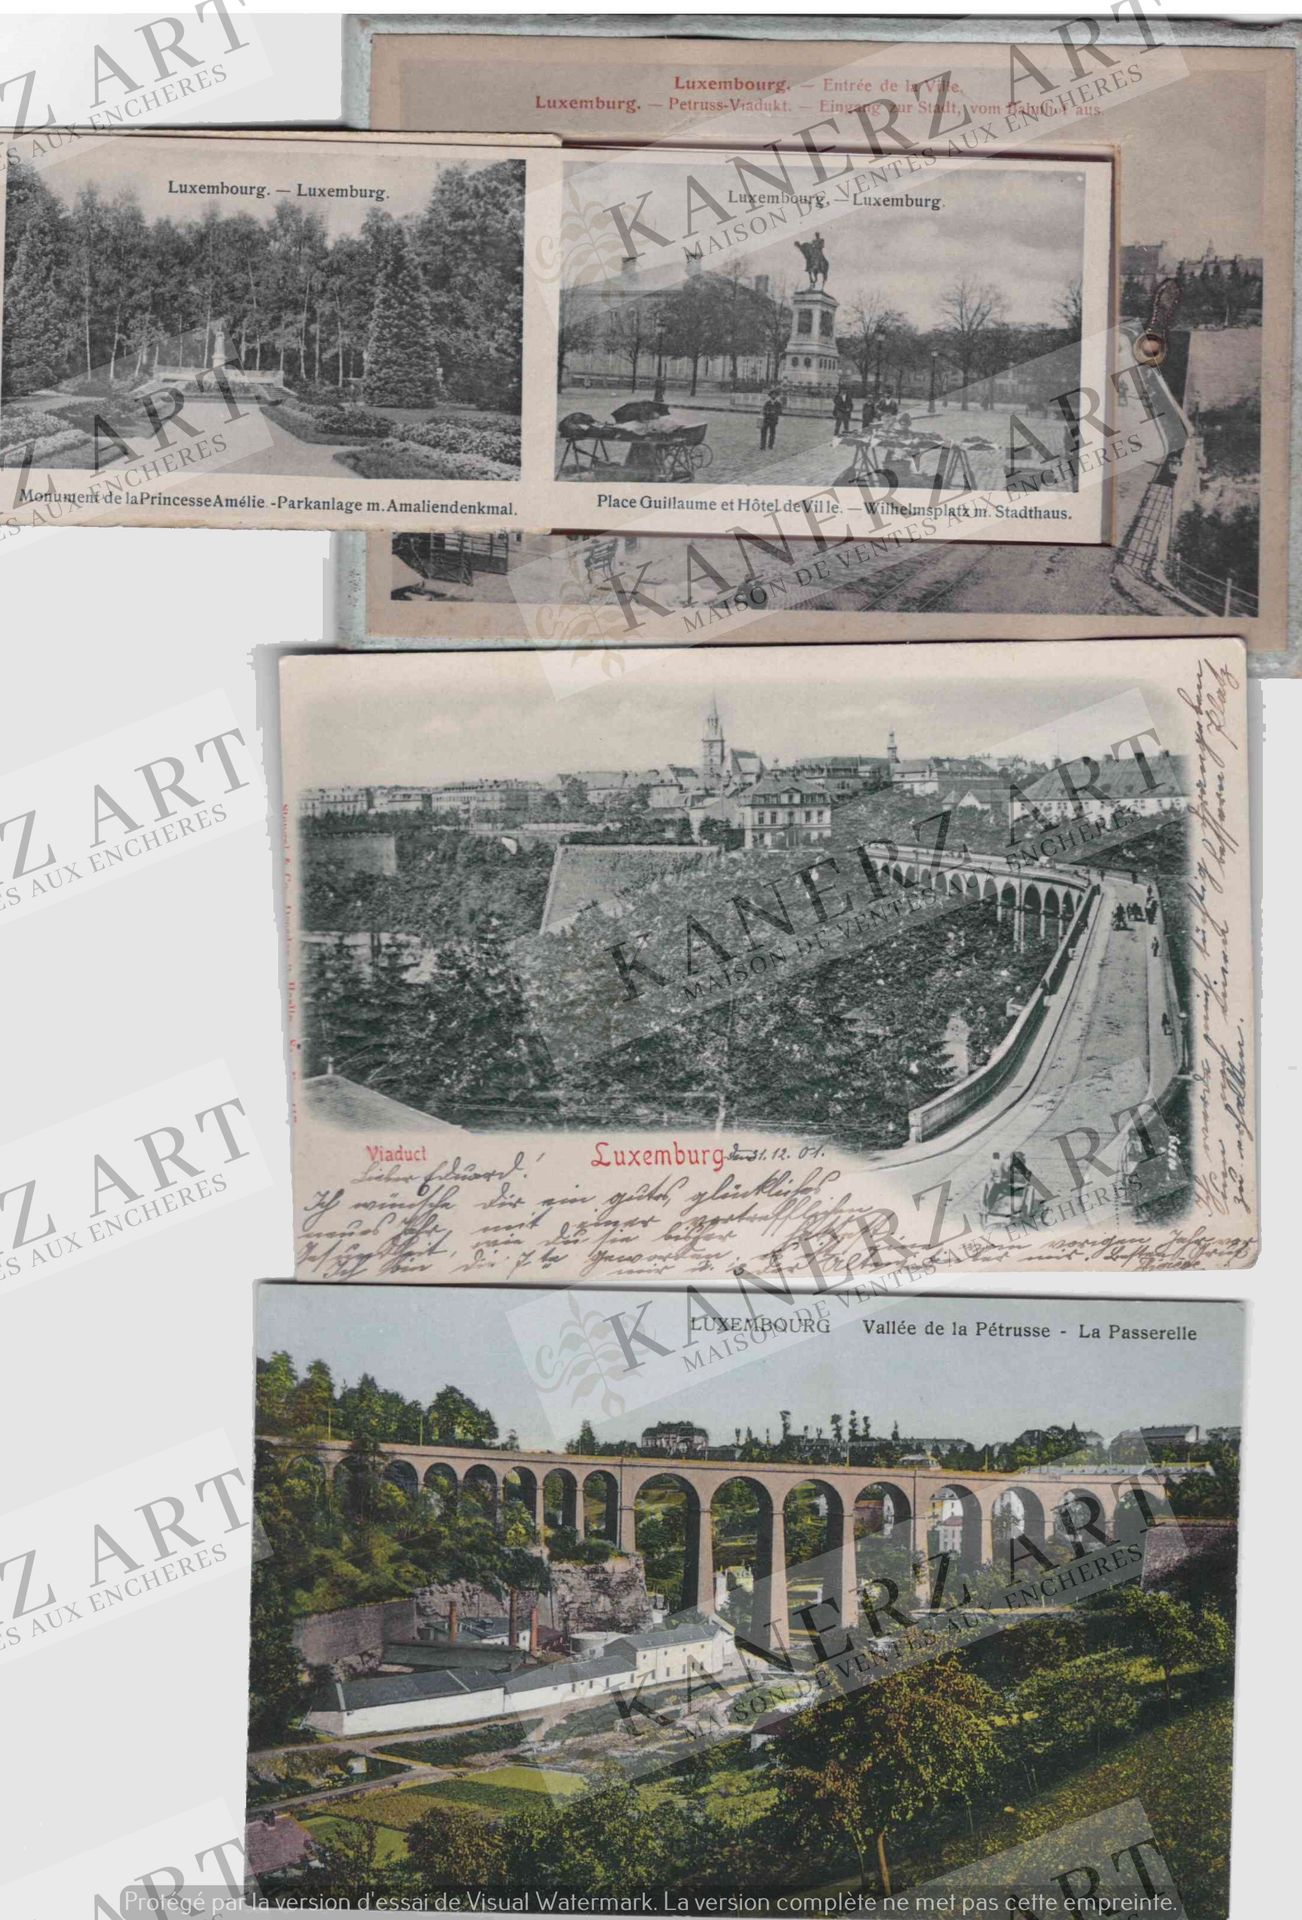 Null VDL: About 50 maps of the Viaduct / Footbridge, years 1900 to 1910